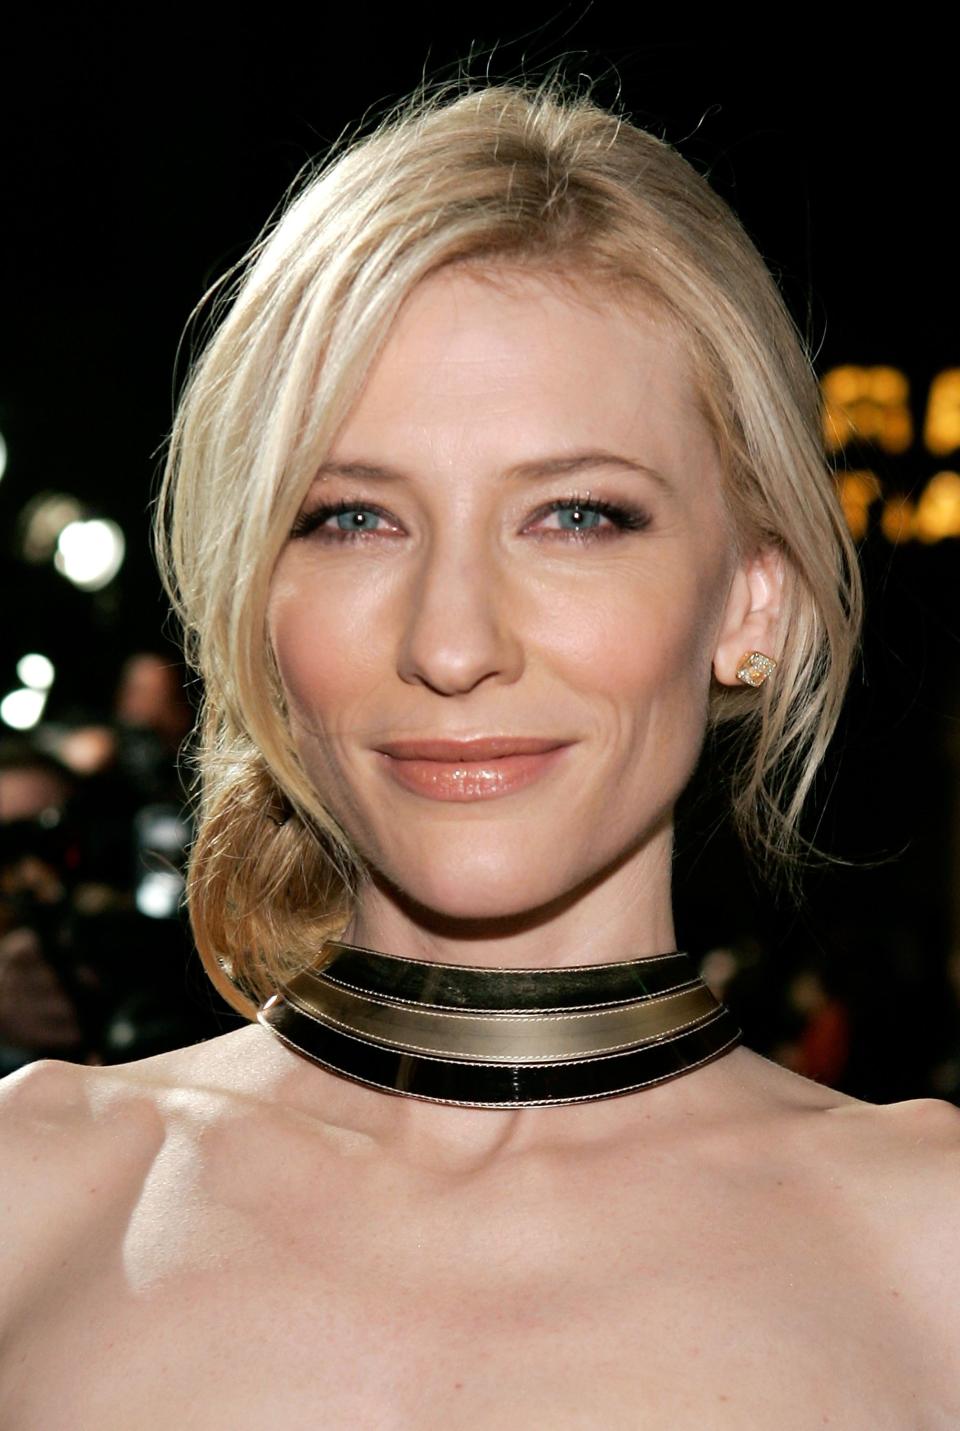 <p>Cate Blanchett arrives at the premiere of Warner Bros. <em>The Good German</em> held at the Egyprian Theatre on Dec. 4, 2006, in Hollywood. (Photo: Vince Bucci/Getty Images) </p>